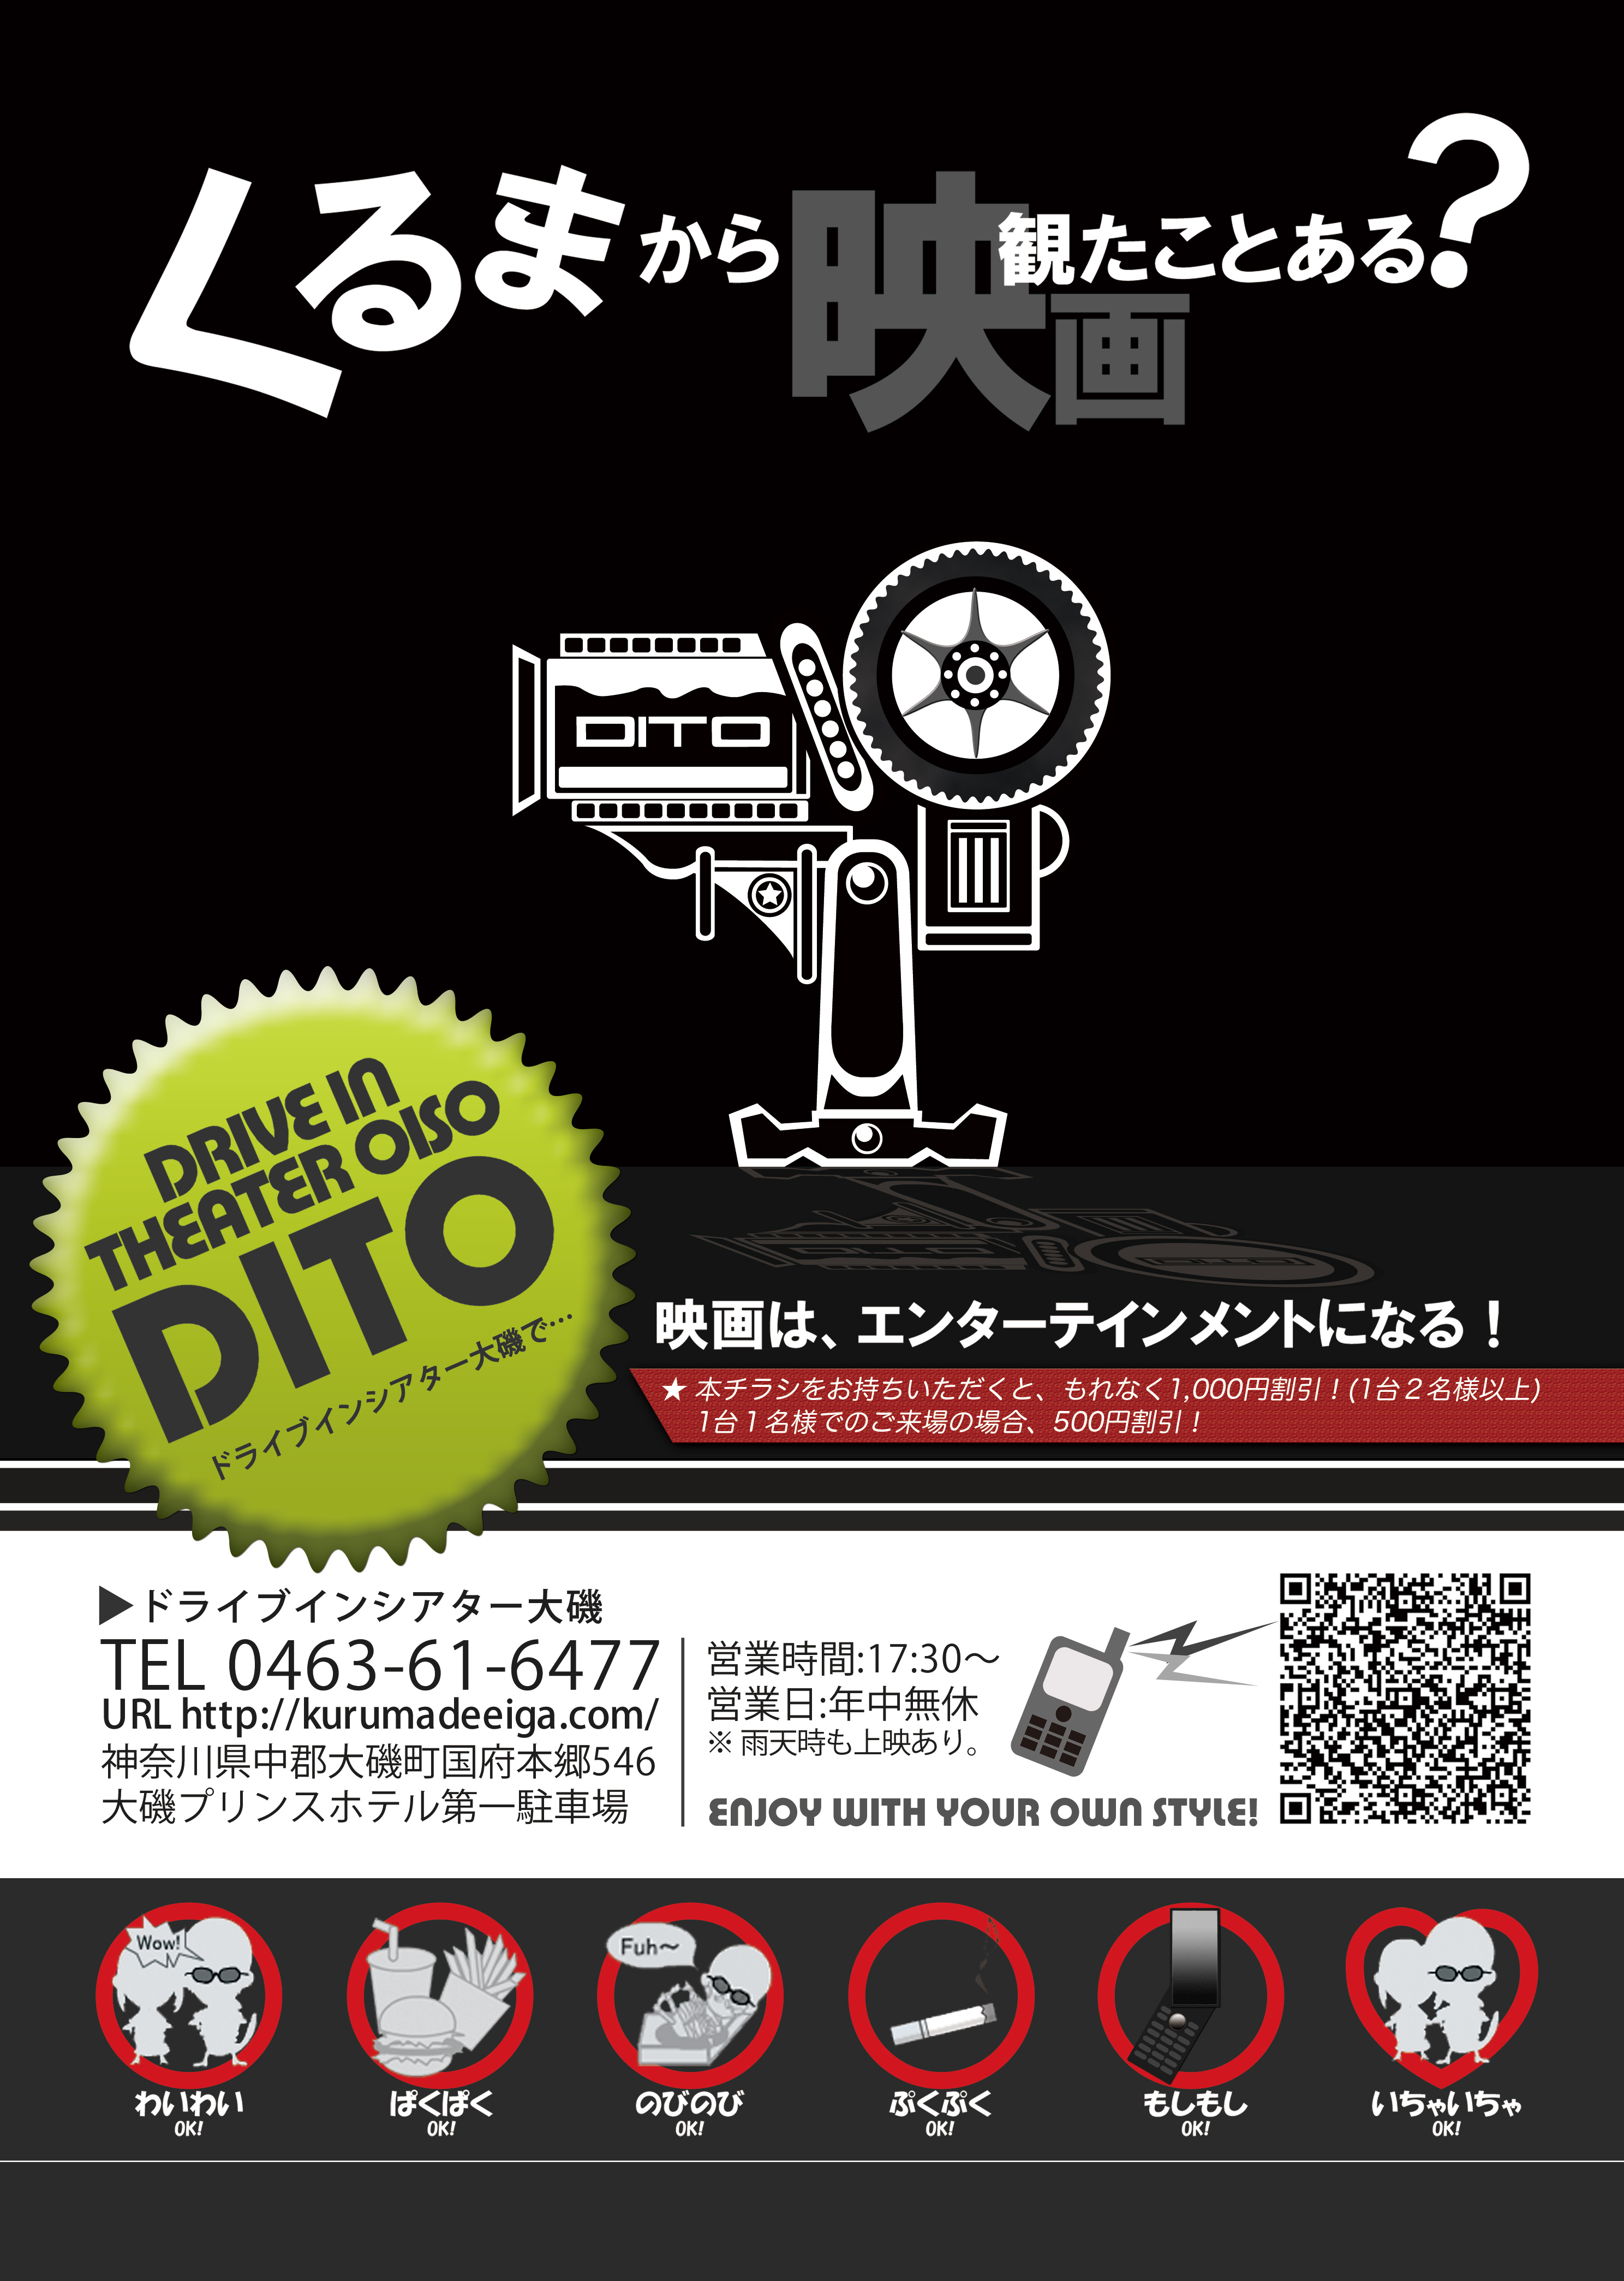 Drive In Theater Oiso